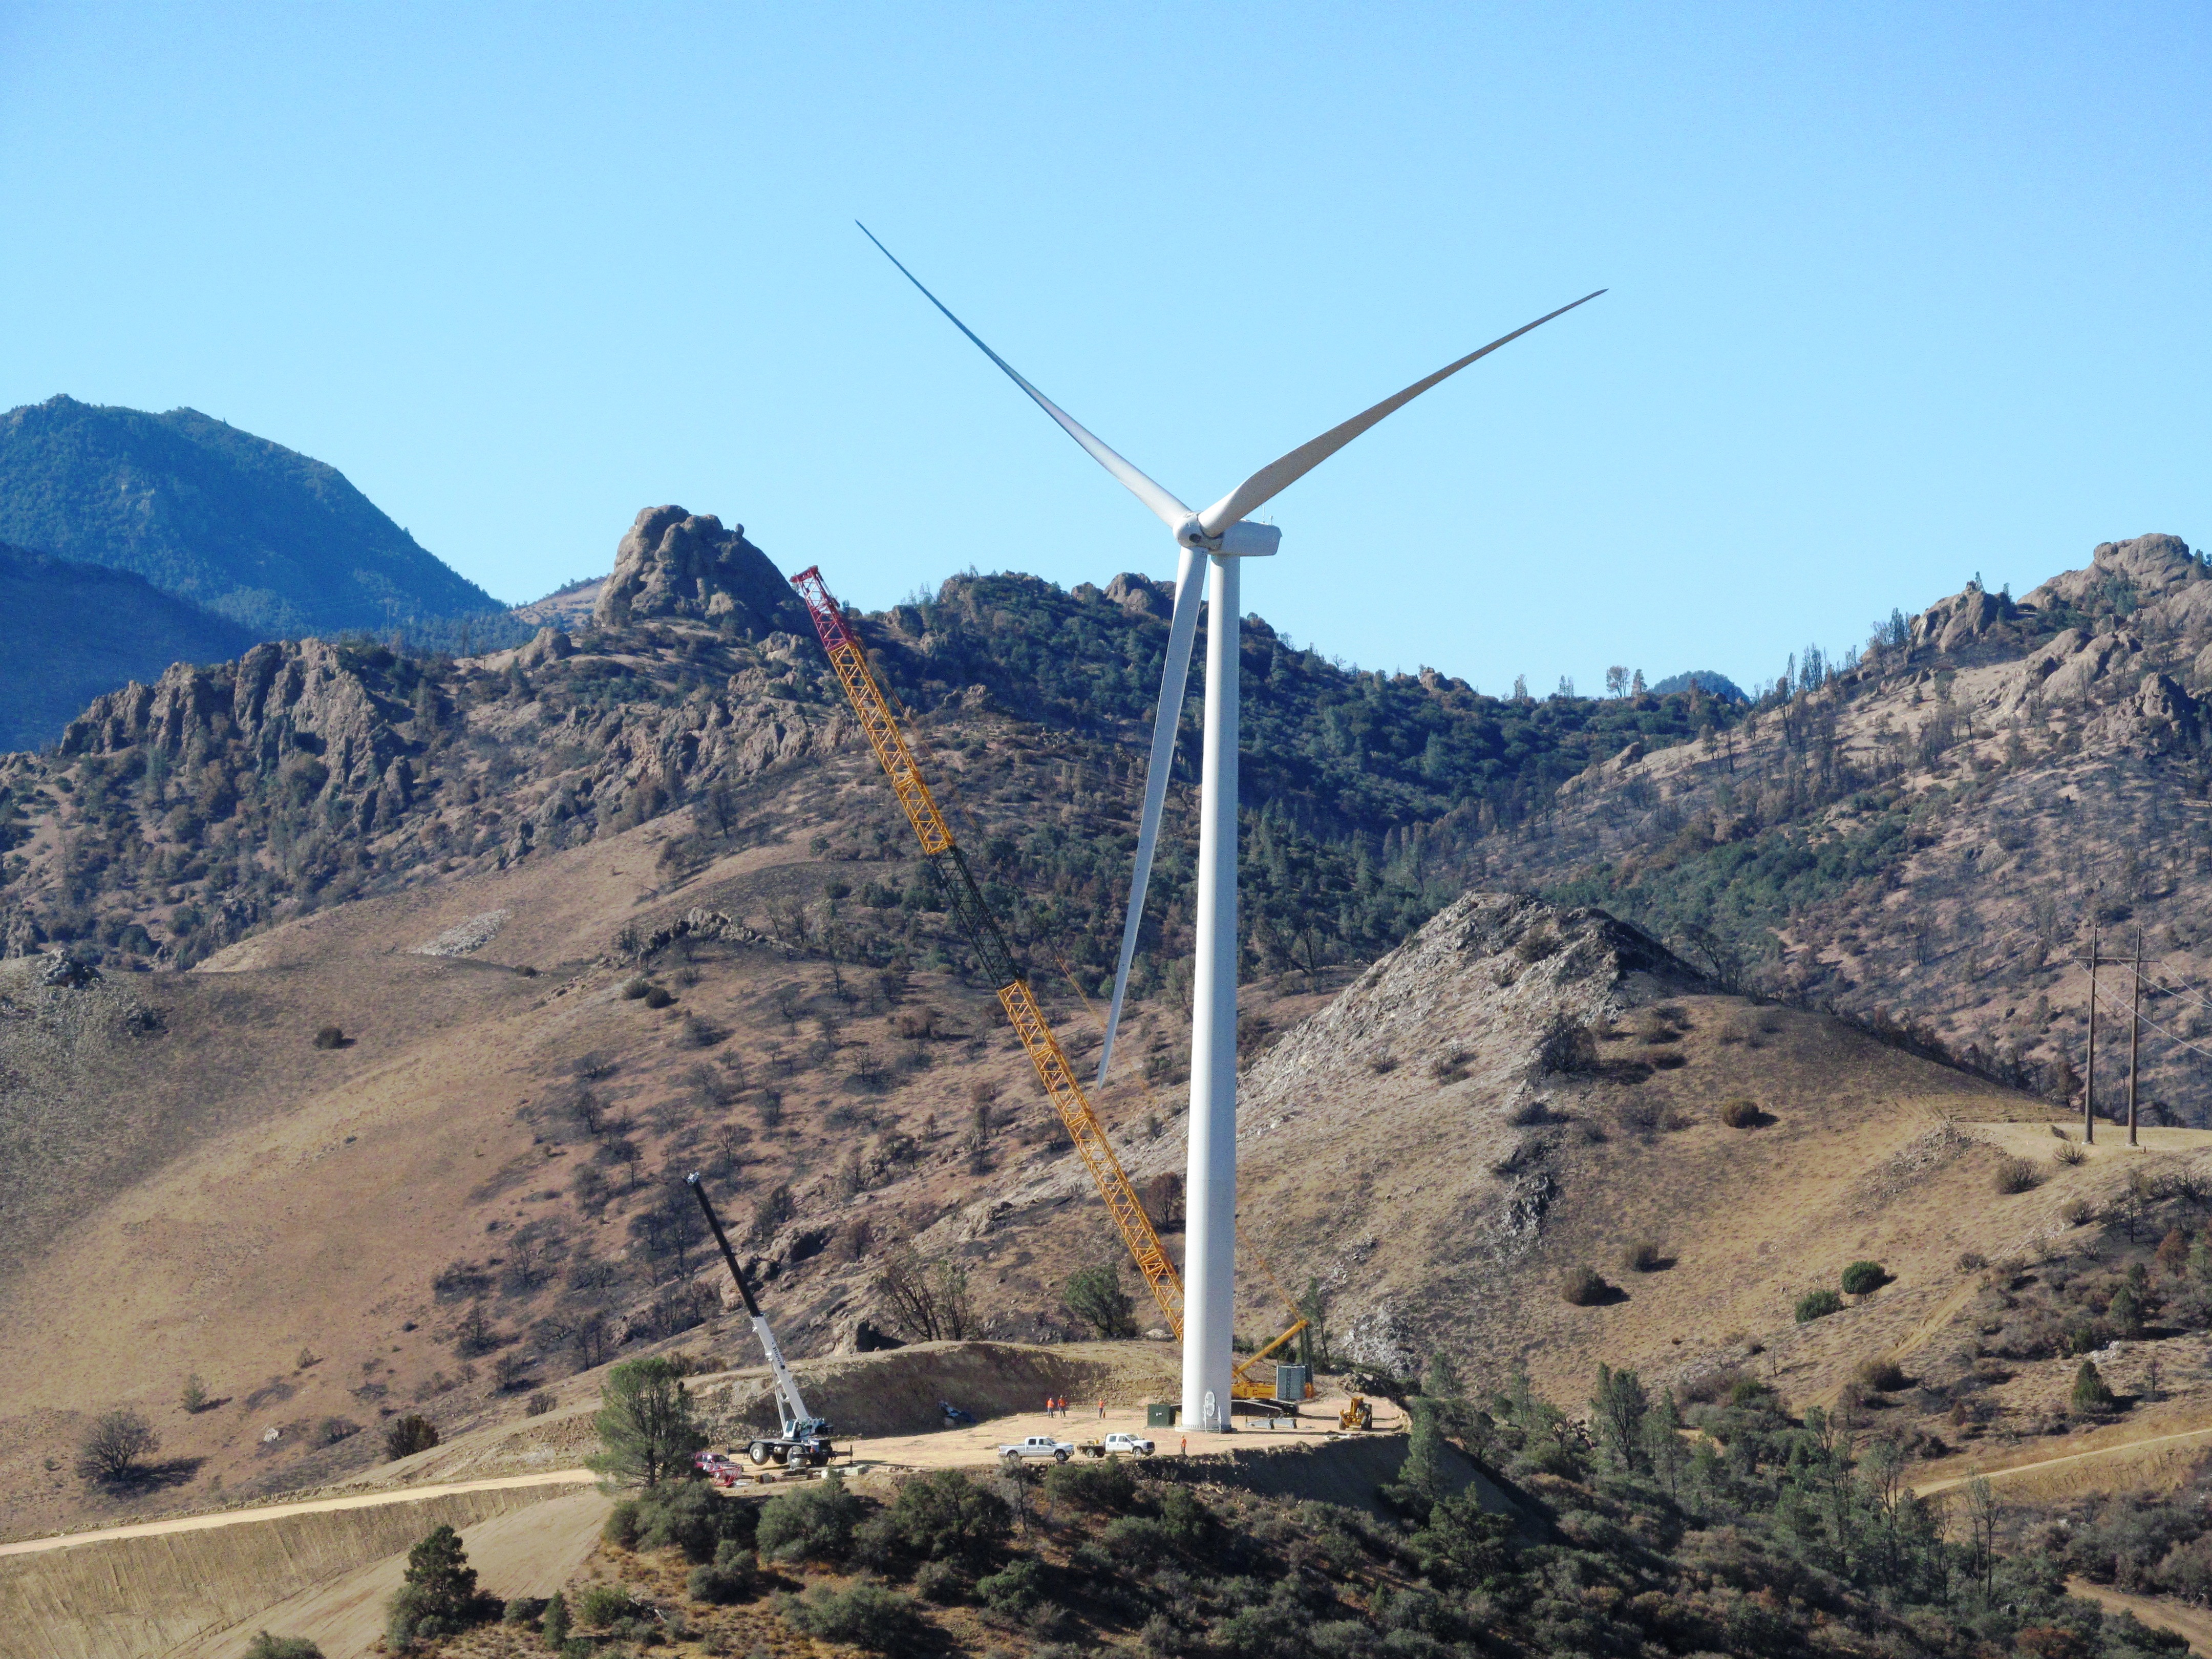 Wind turbine being erected in the California hills Altimont Pass